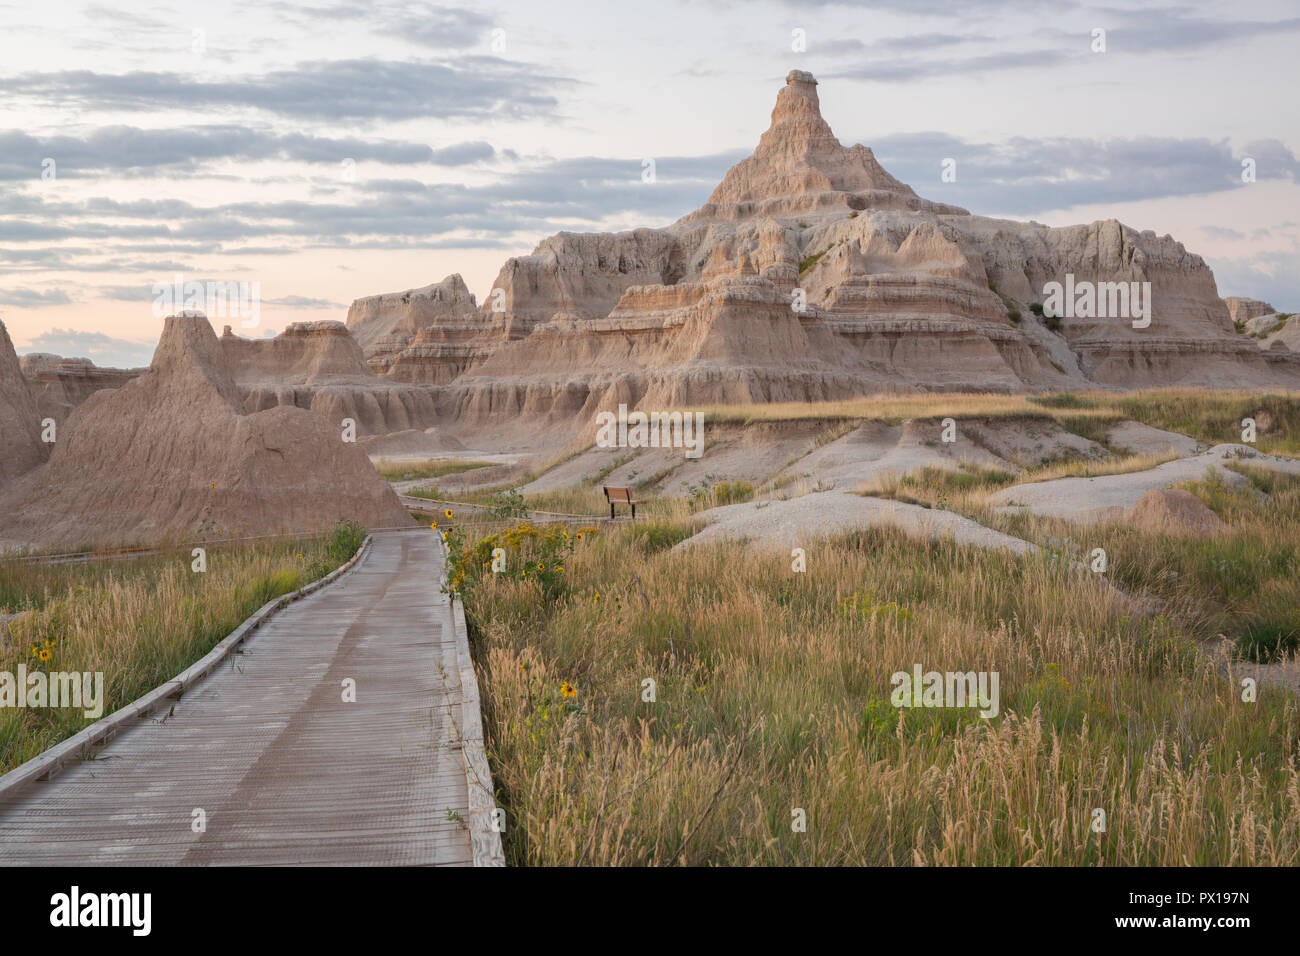 BadLands mountains on a Beautiful cloudy day. With Board walk leading to Mountains. Stock Photo